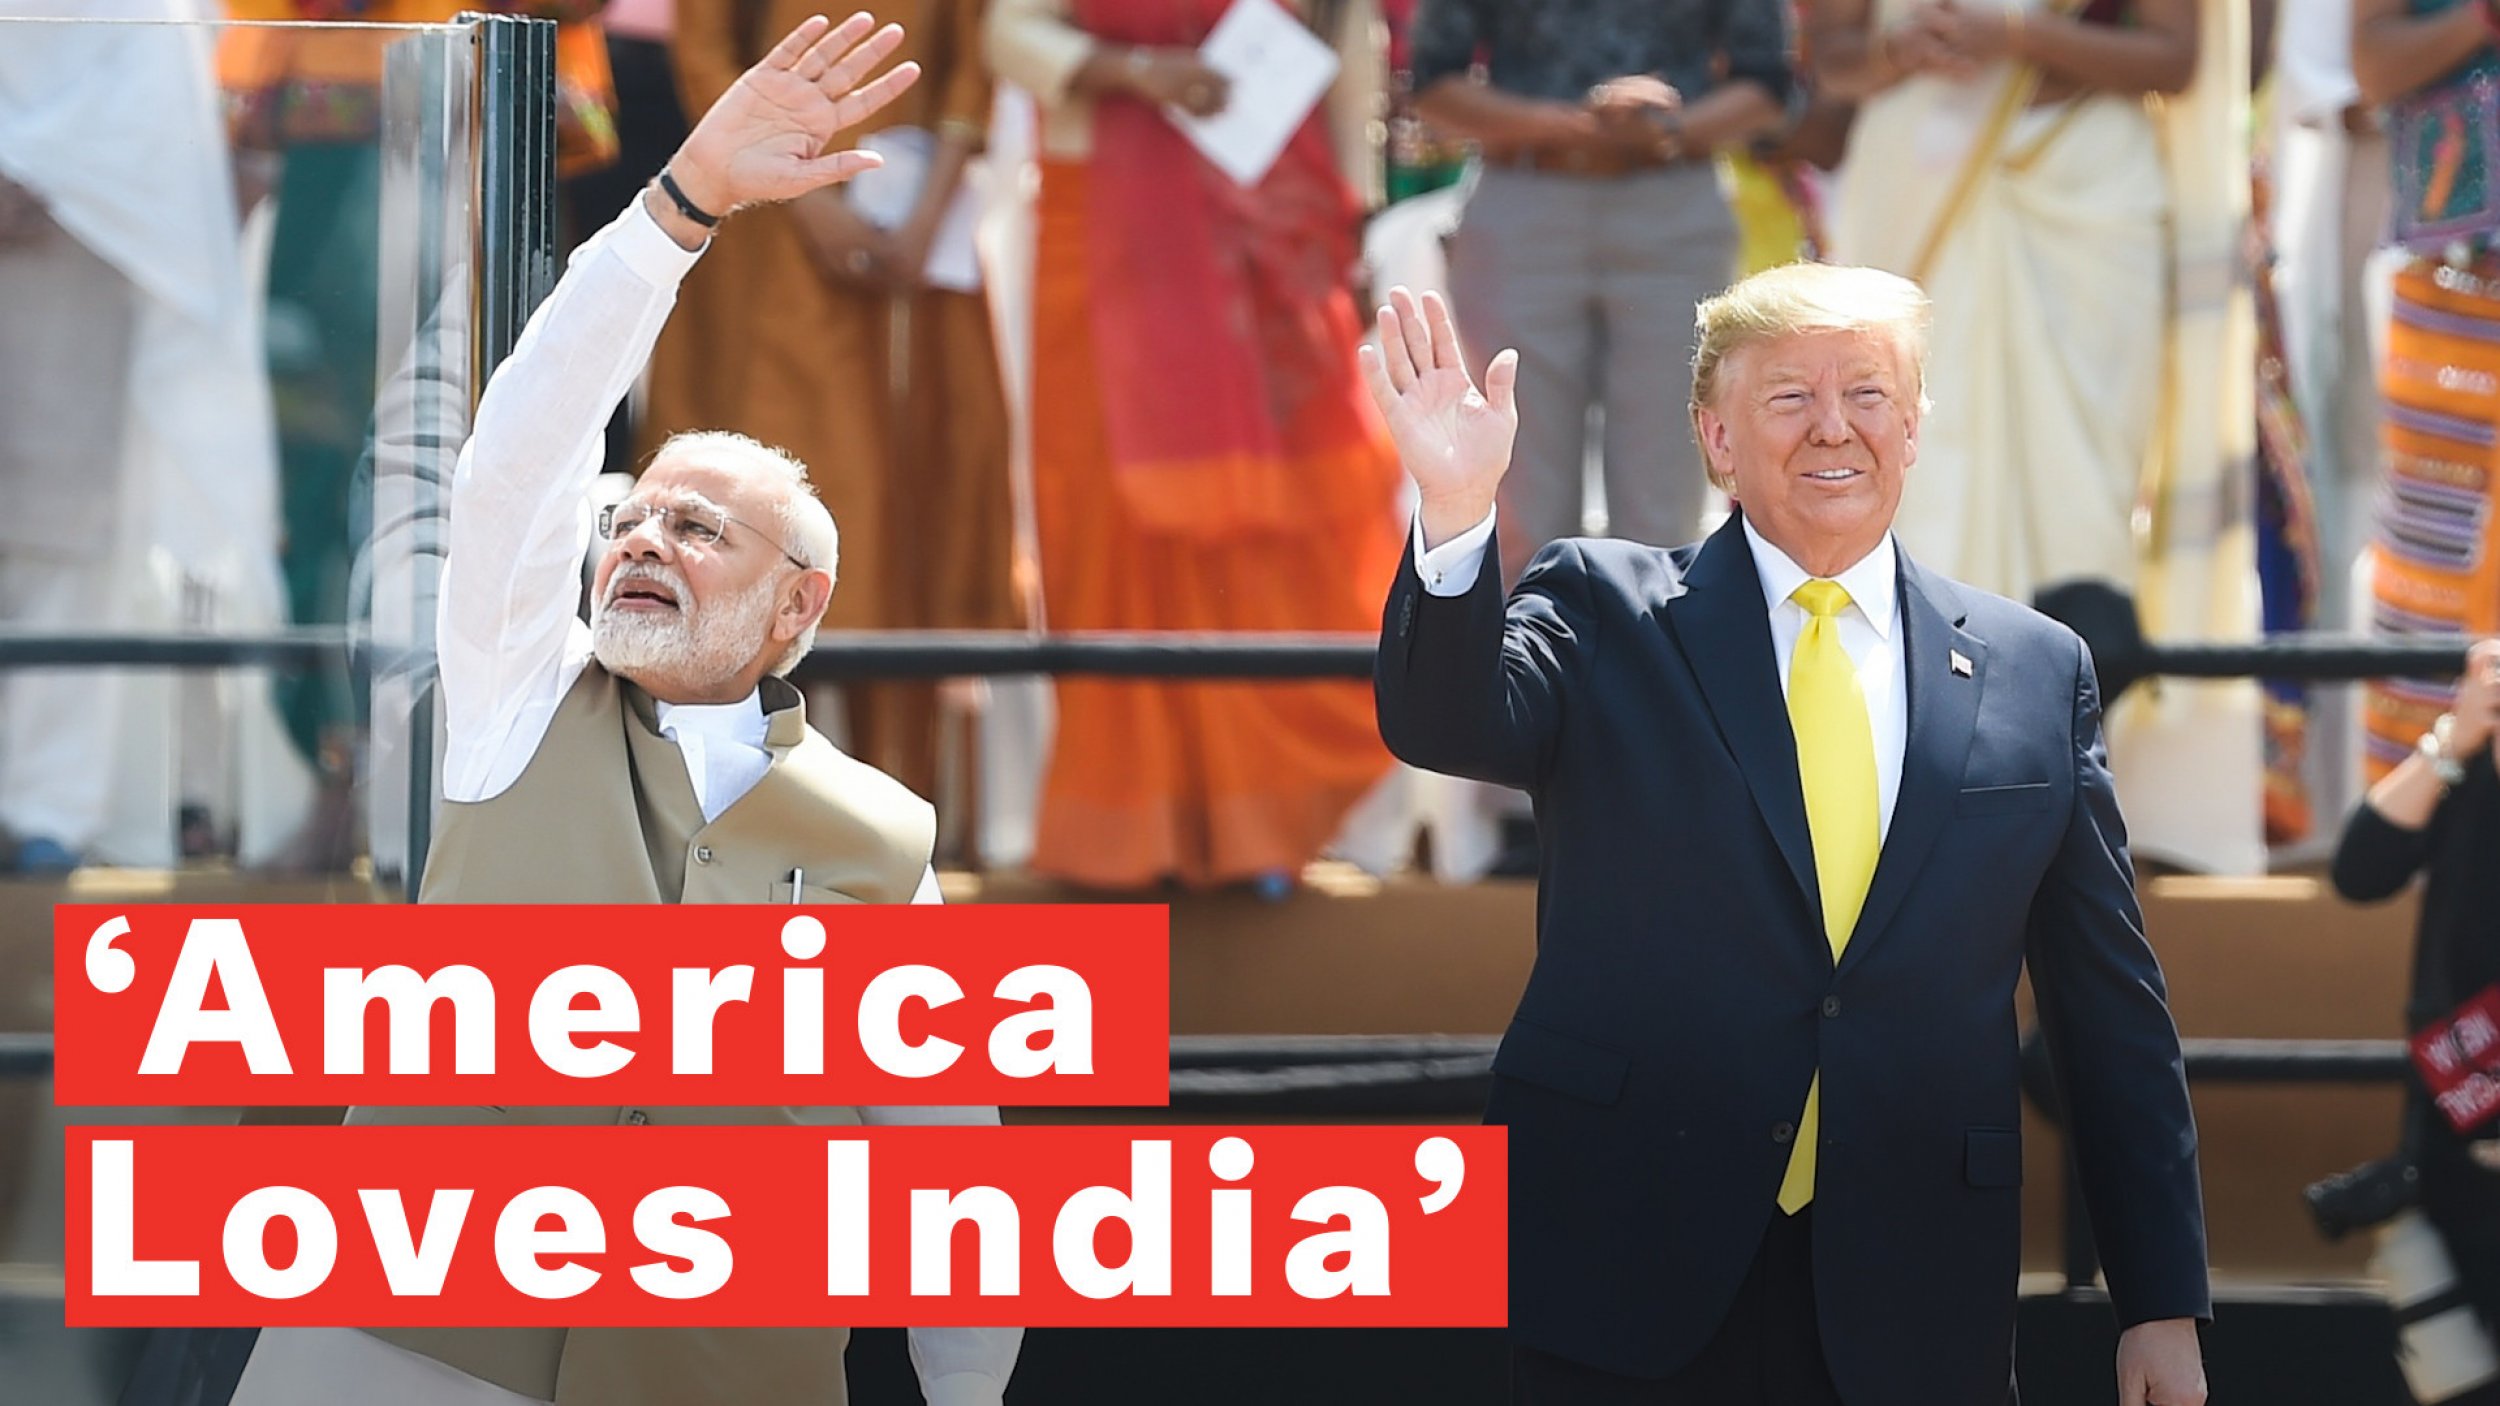 Trump Says America Loves India After A Warm Welcome From India Prime Minister Modi And Crowd